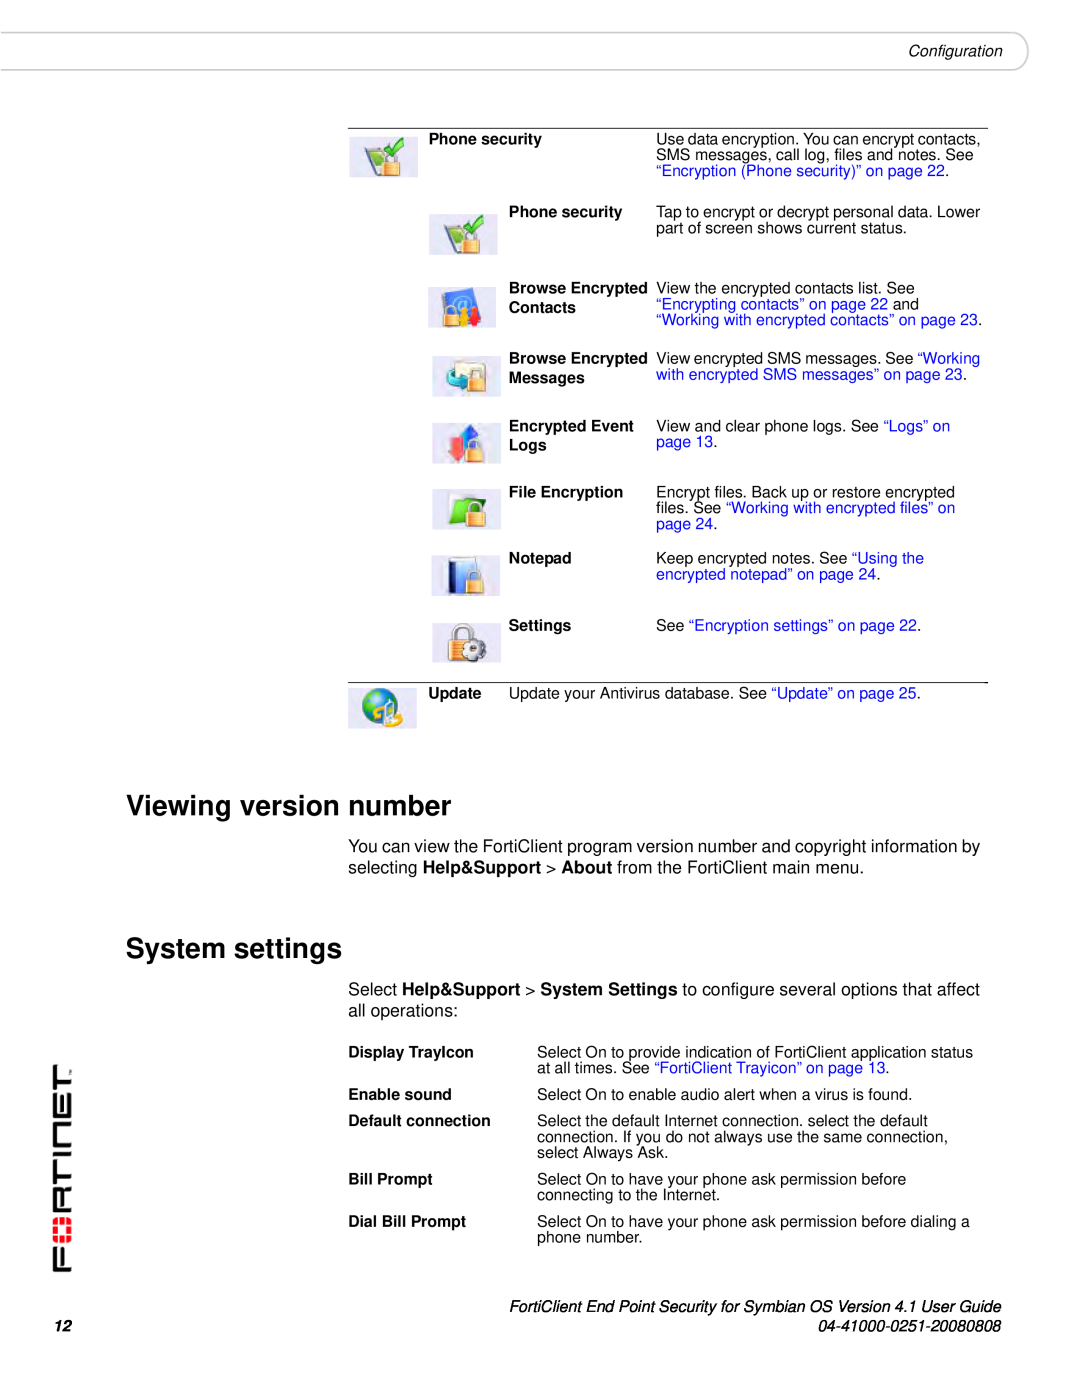 Fortinet Version 4.1 manual Viewing version number, System settings 